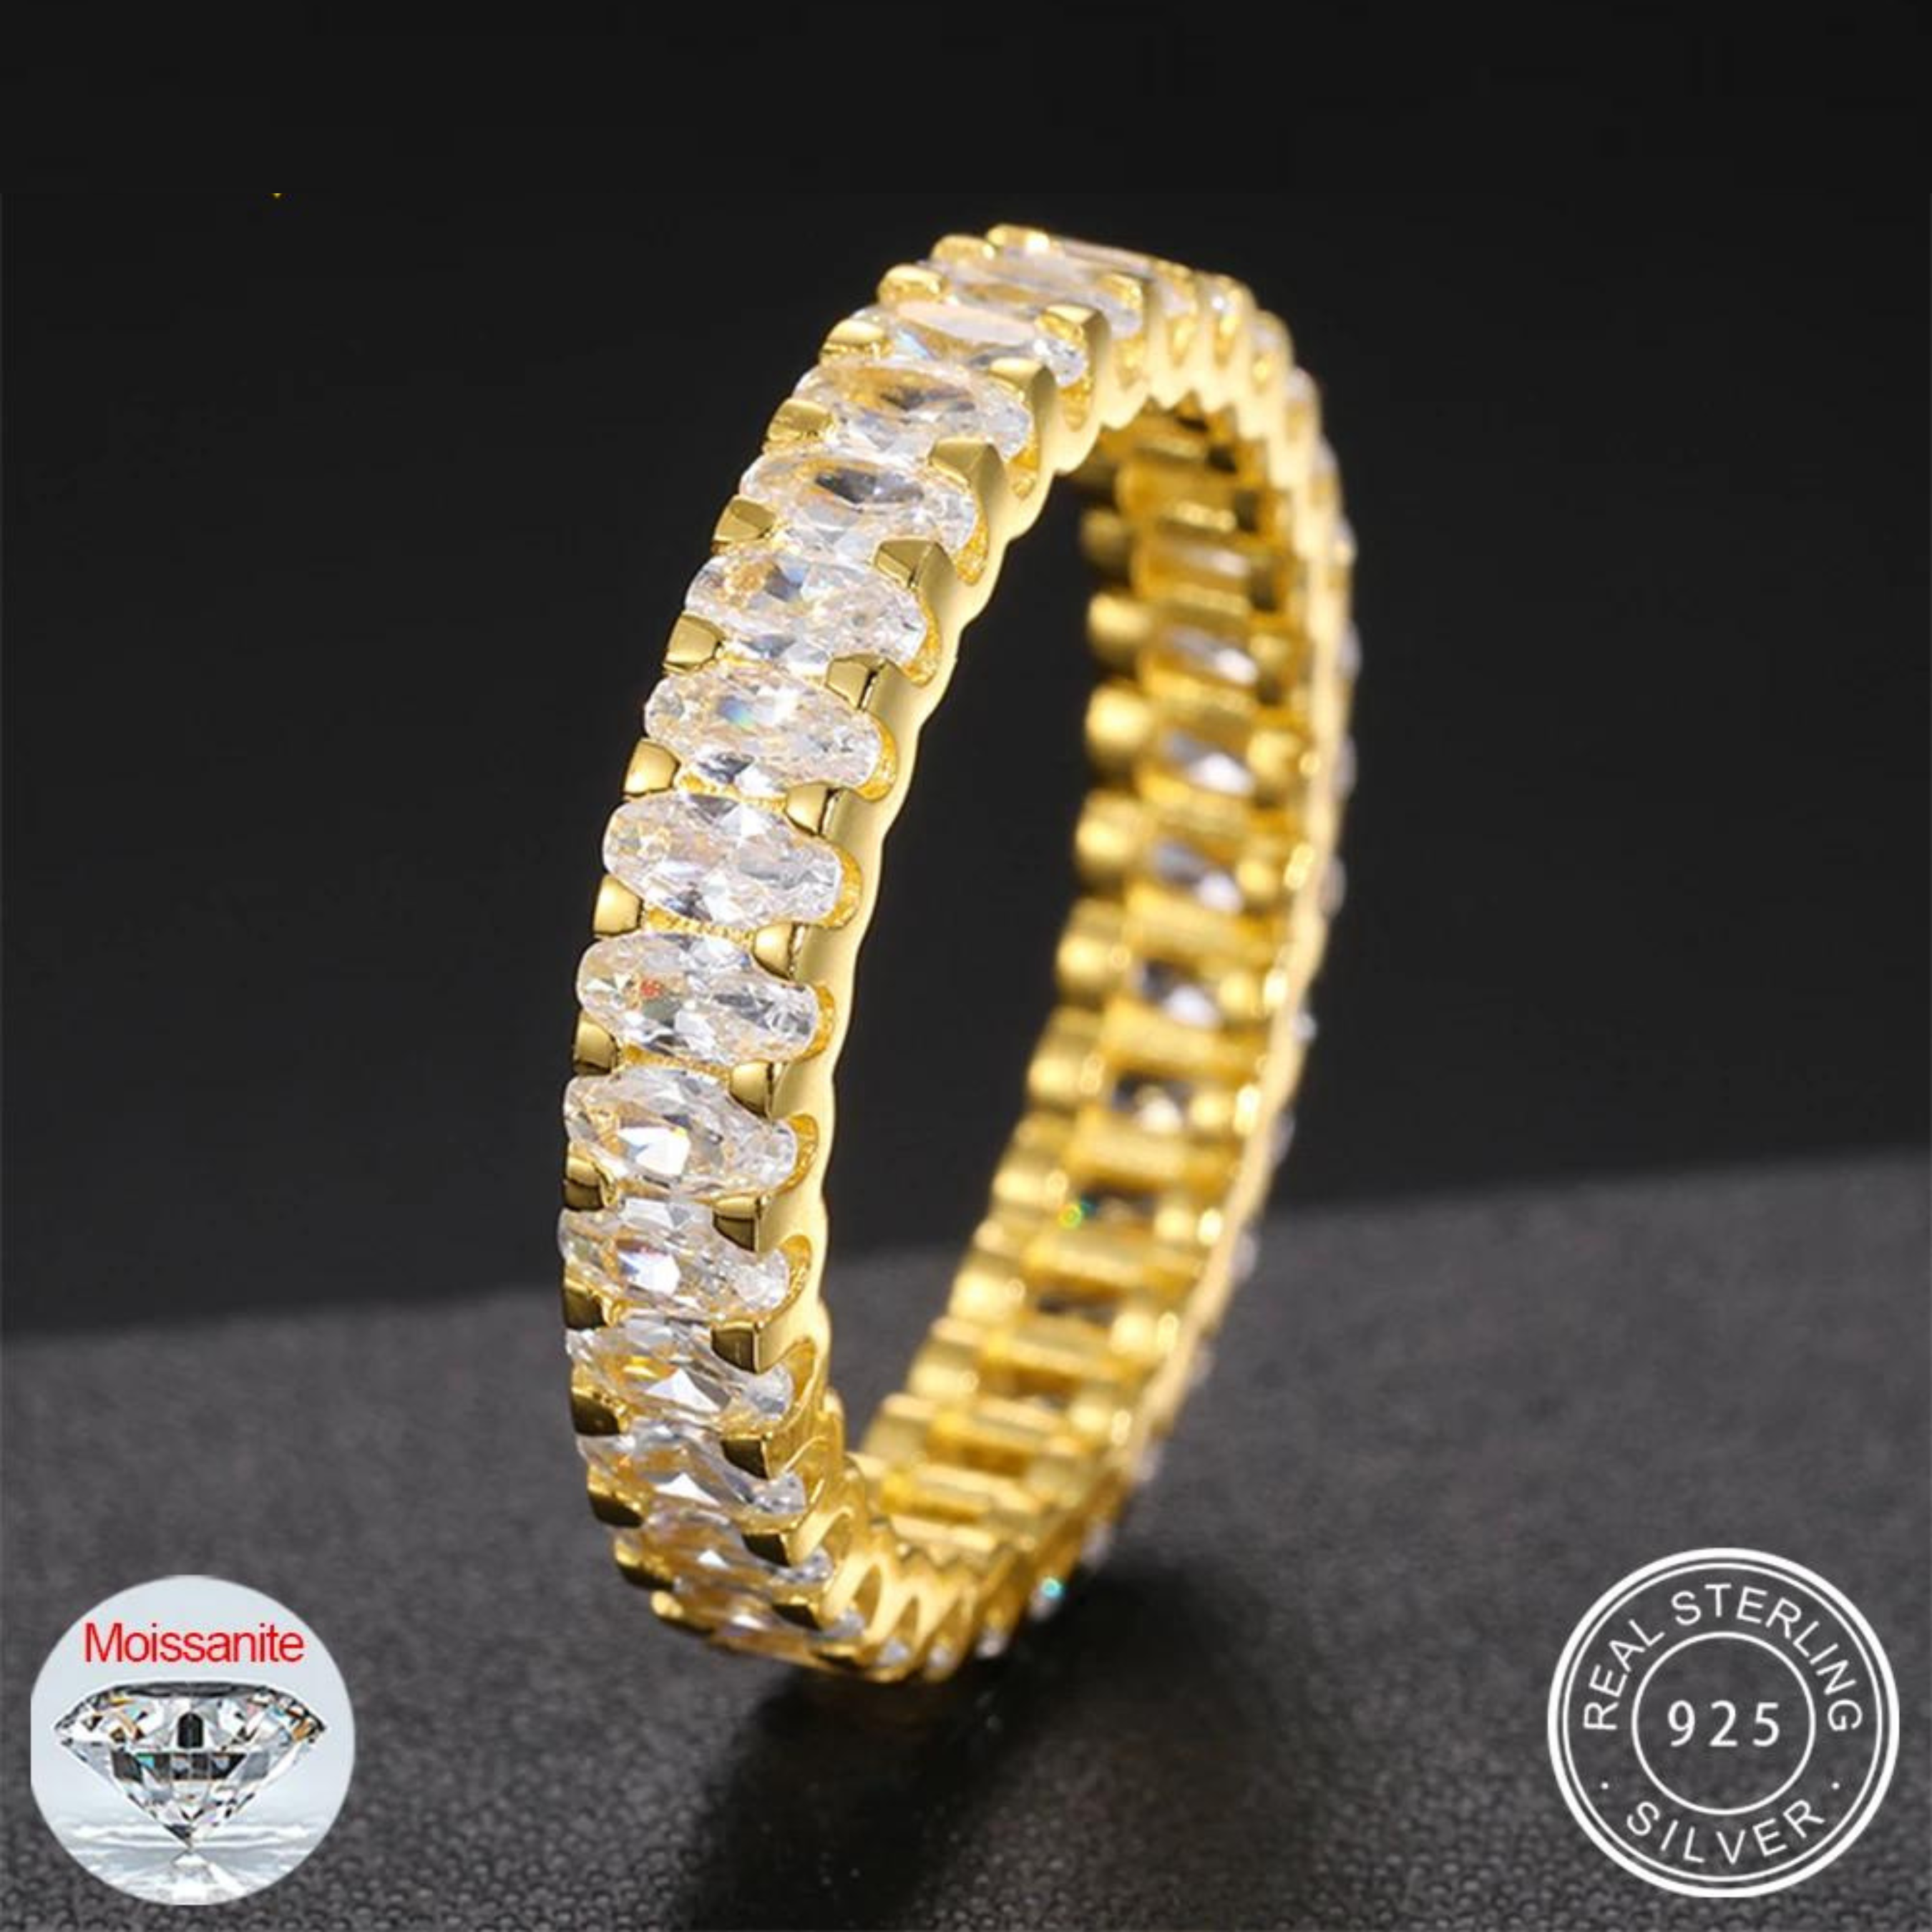 S925 Moissanite Oval Cut Eternity Band Ring